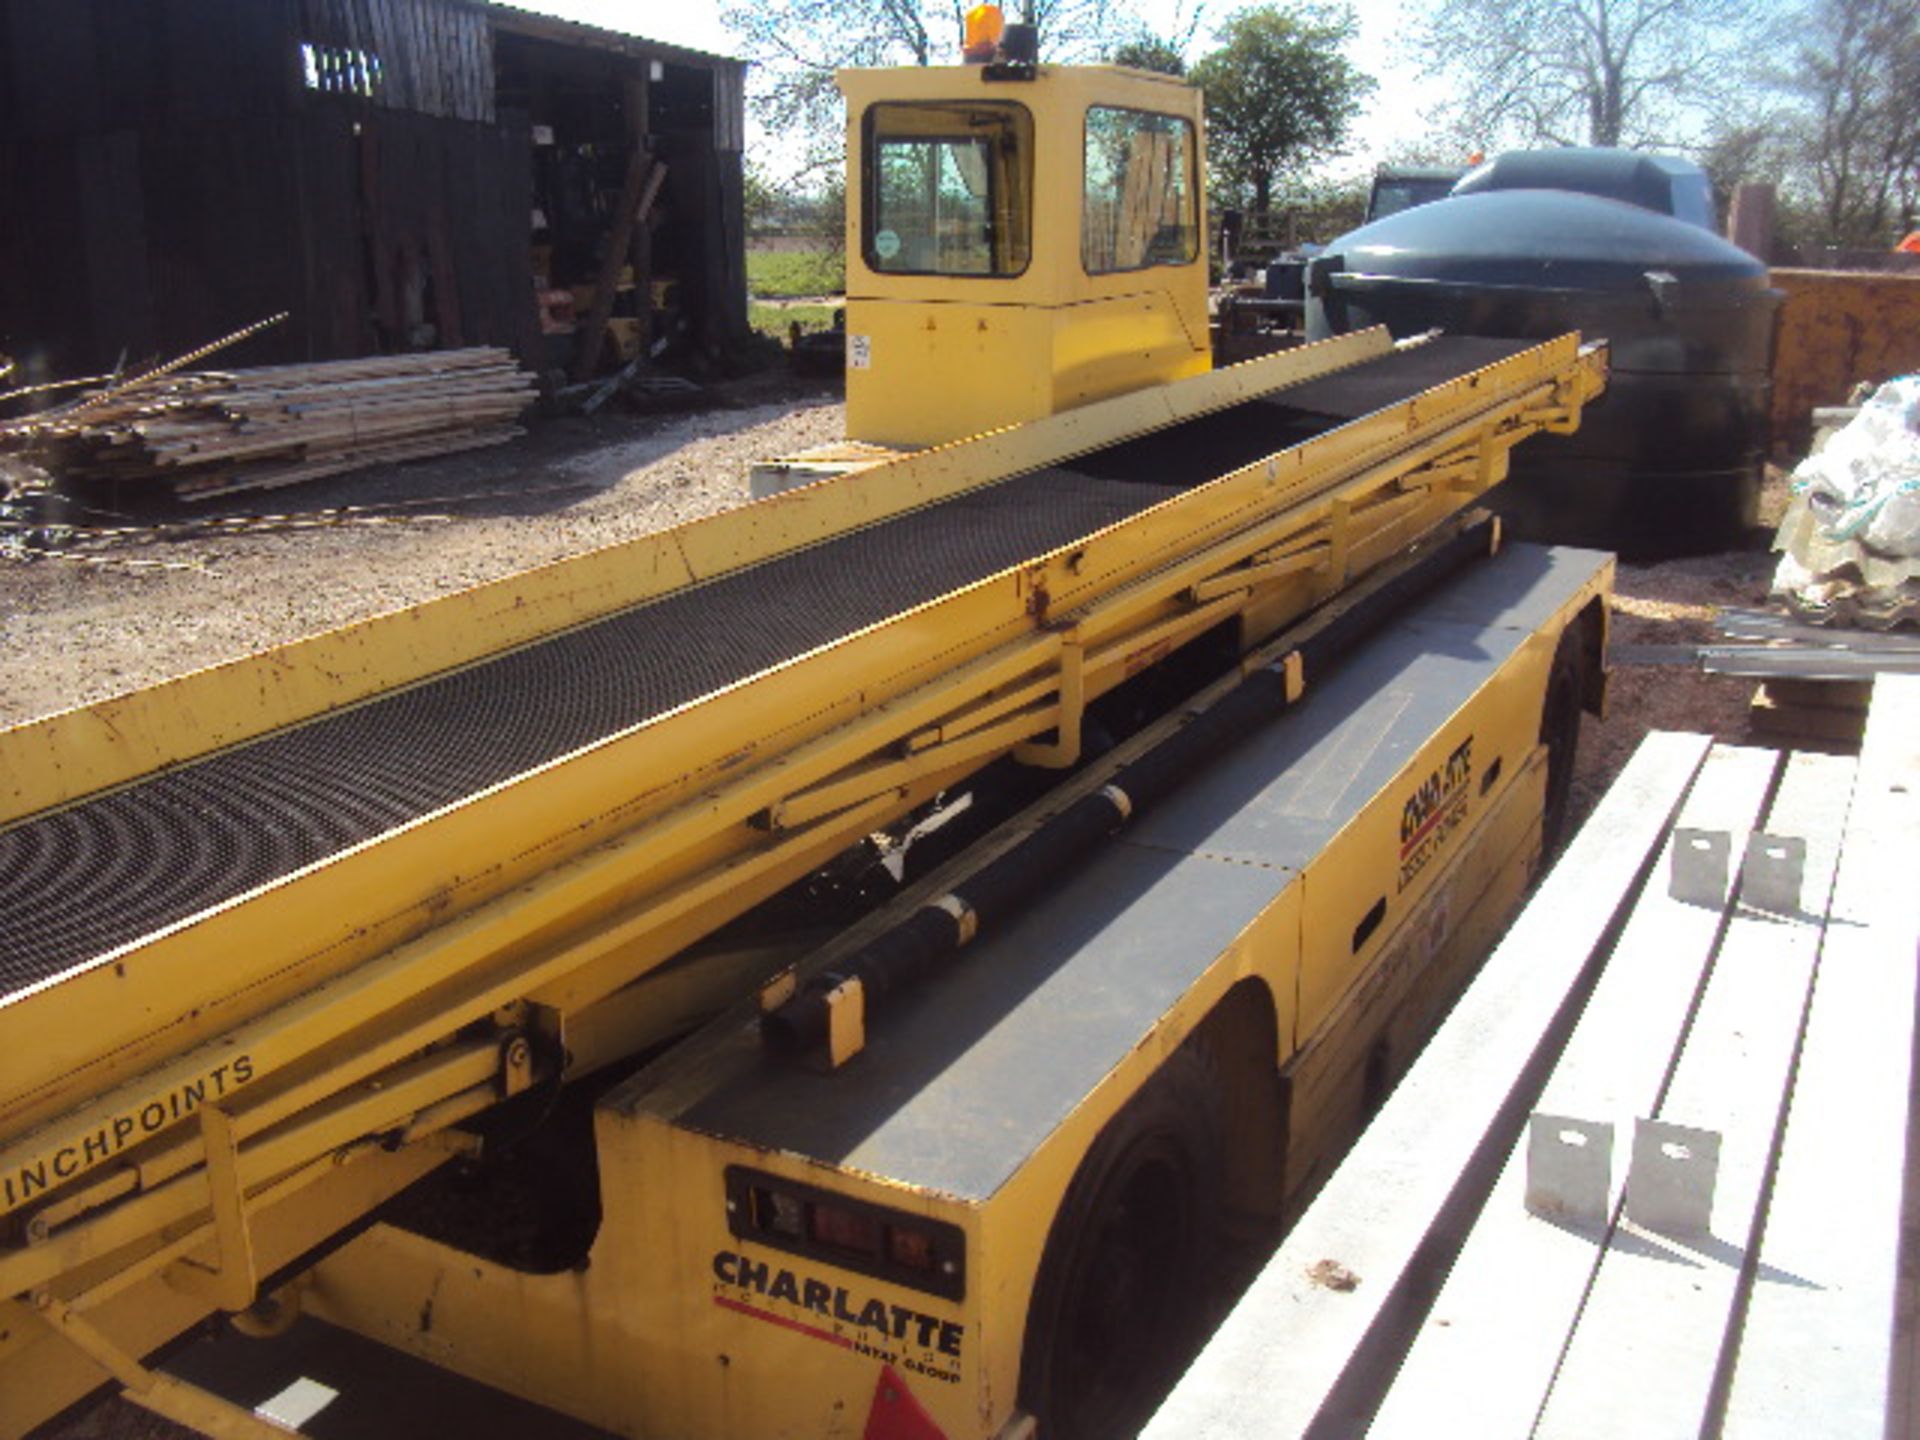 FAYAT Charlatte Manutention diesel driven mobile 30' conveyor with pendant control (This item is - Image 4 of 4